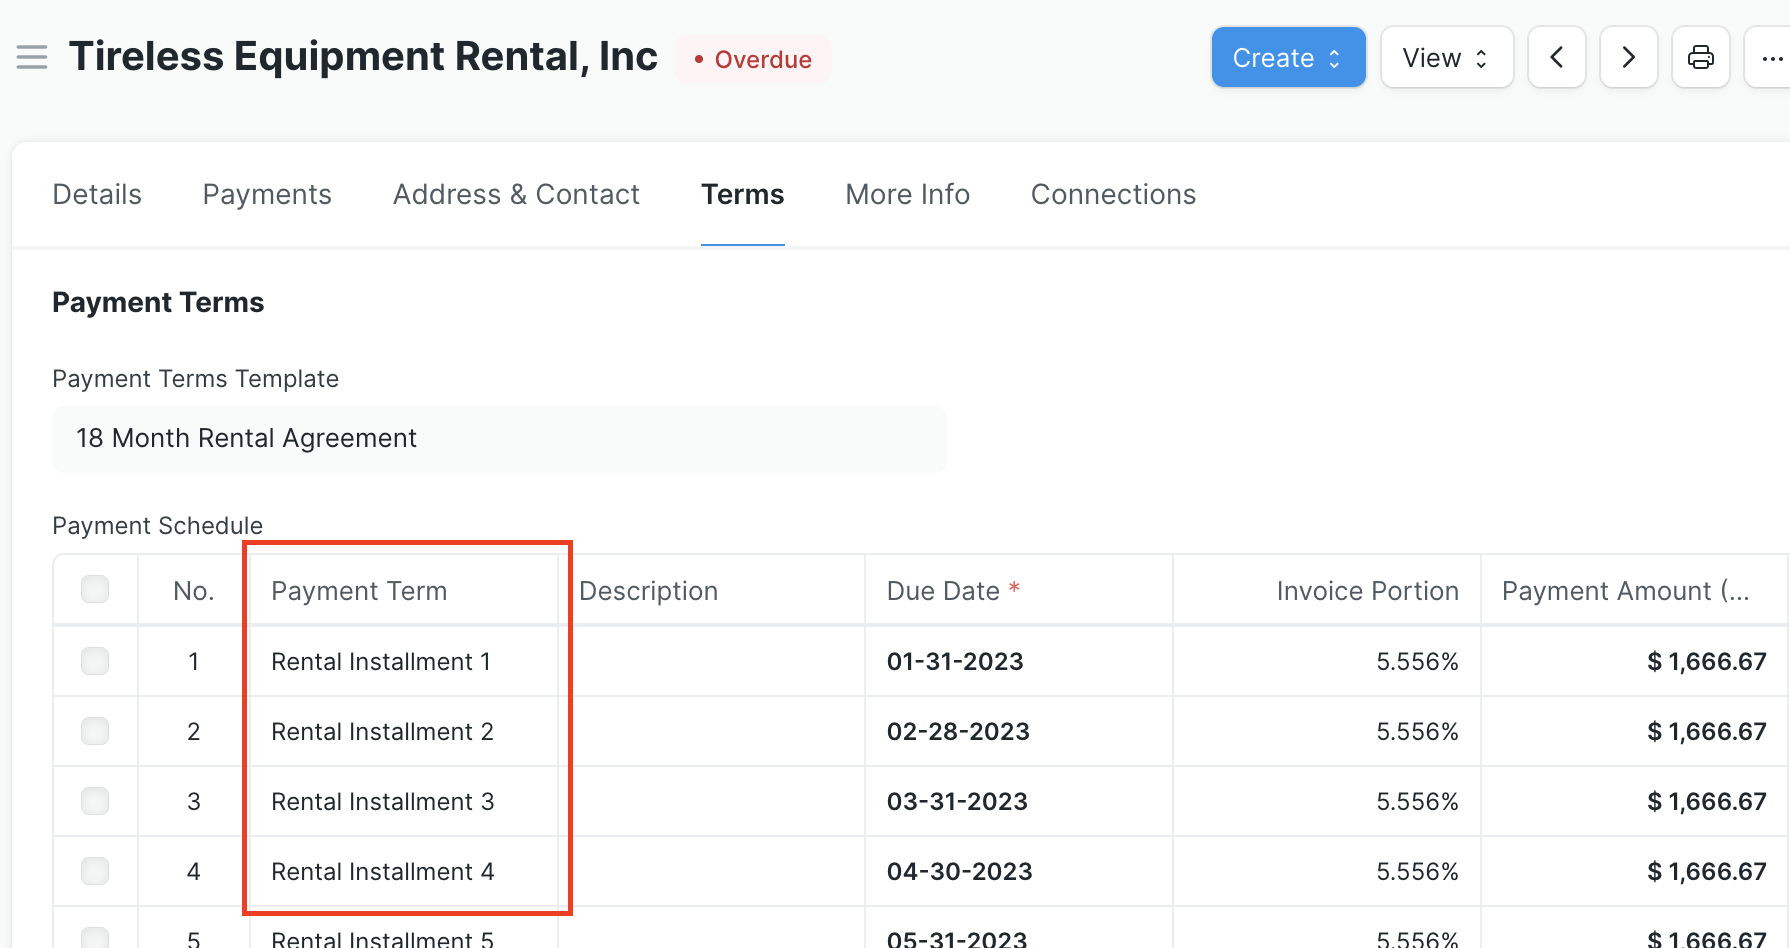 Screen shot of an example Payment Schedule defined in a purchase invoice. The Payment Term column of the table links to unique documents, name "Rental Installment 1", "Rental Installment 2", etc. for the different rows.